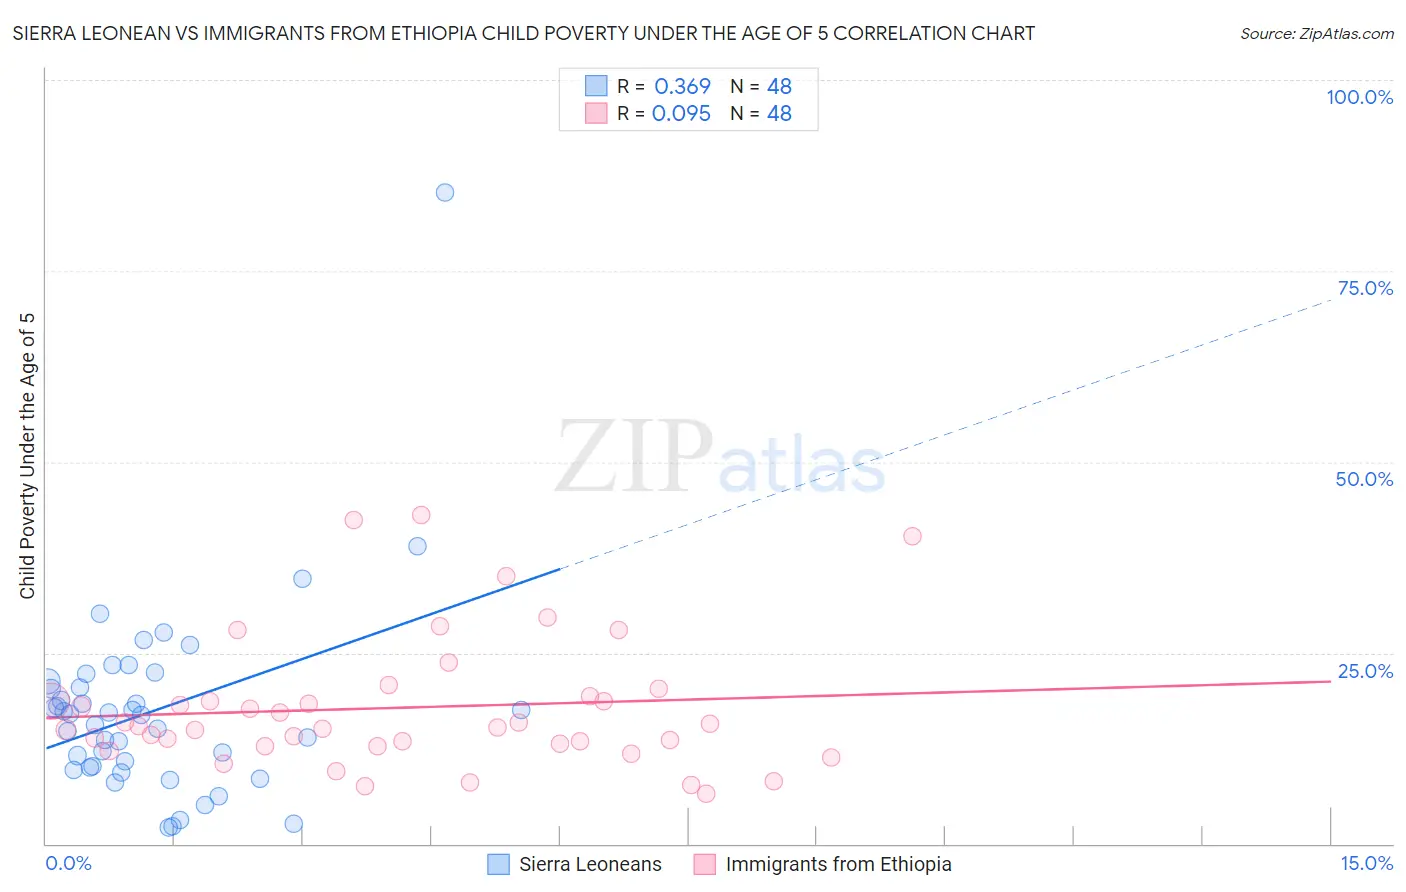 Sierra Leonean vs Immigrants from Ethiopia Child Poverty Under the Age of 5